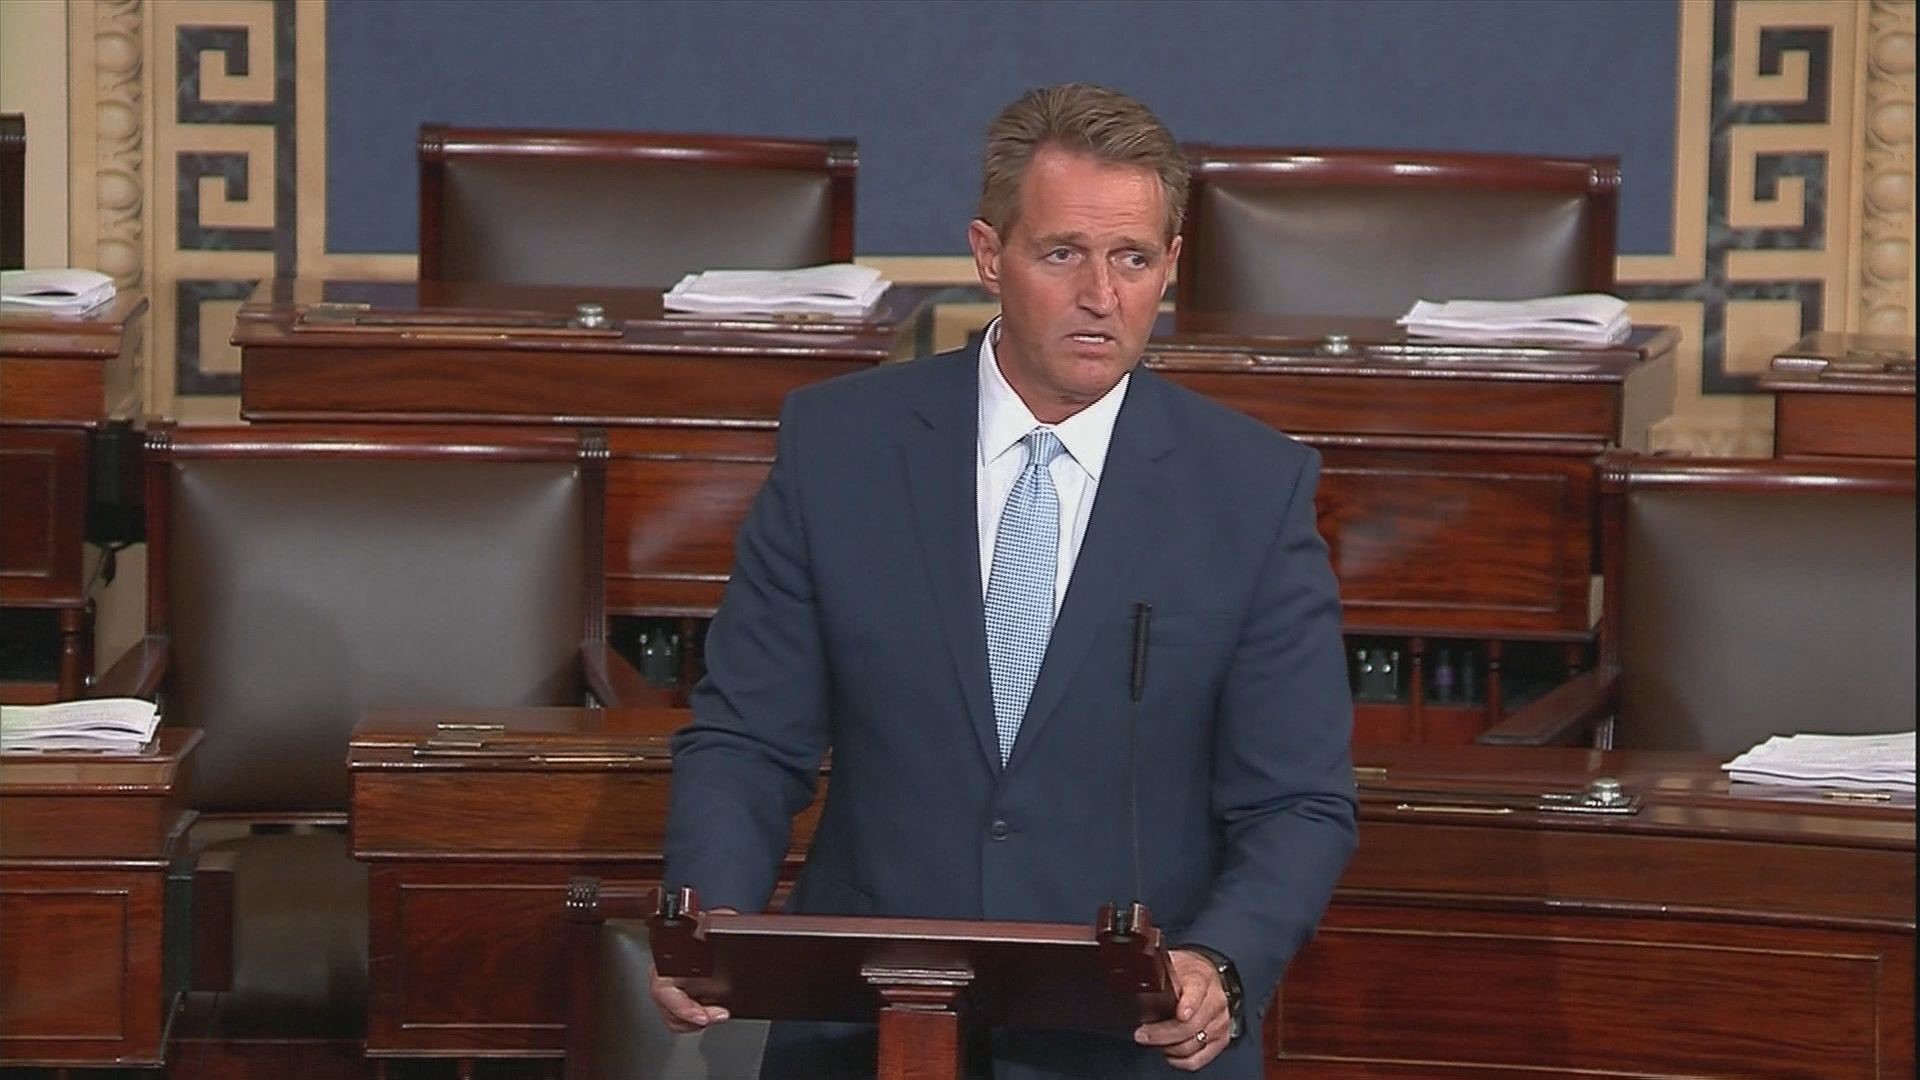 Senator Jeff Flake co-sponsored a bill that would protect the Muller investigation, only to have it rejected. Flake says that until the Senate votes on the bill he will withhold votes on any judicial nominees made by Trump.